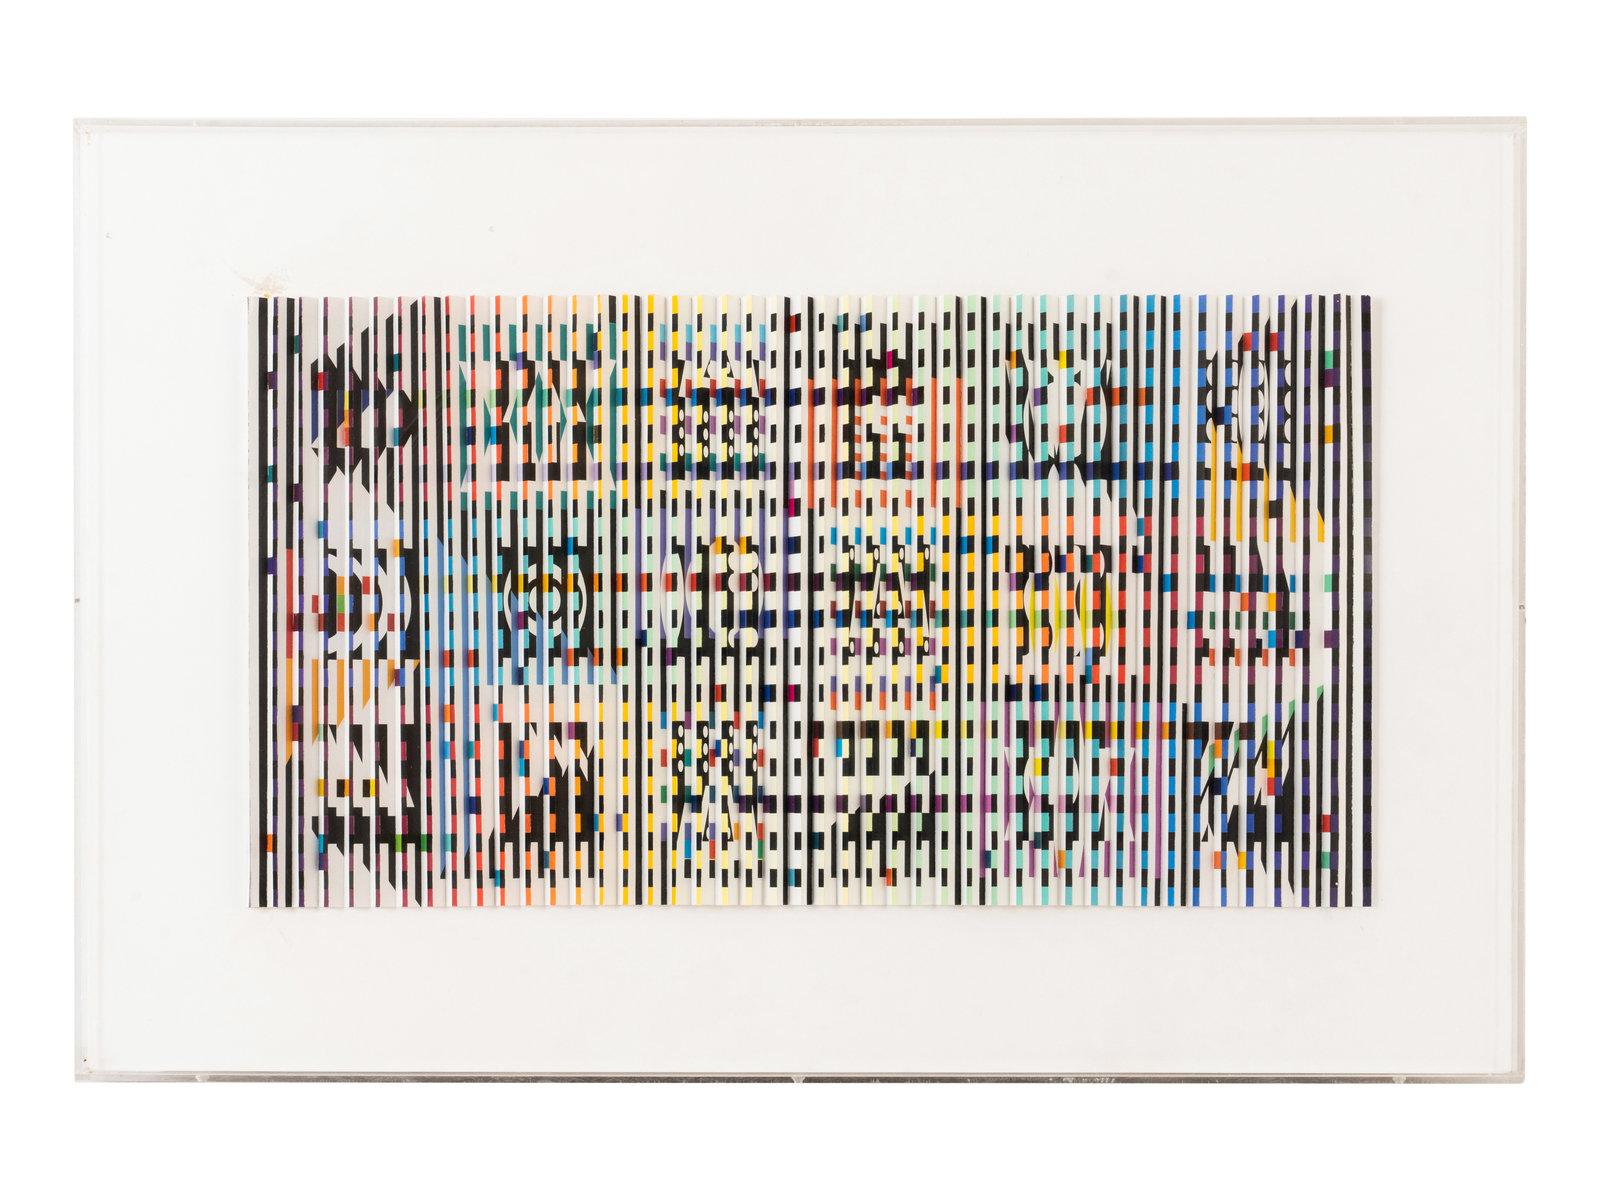 A colorful work in a kinetic style by Yaacov Agam. From every angle you can see a different illustration. The piece is framed in transparent Plexiglas